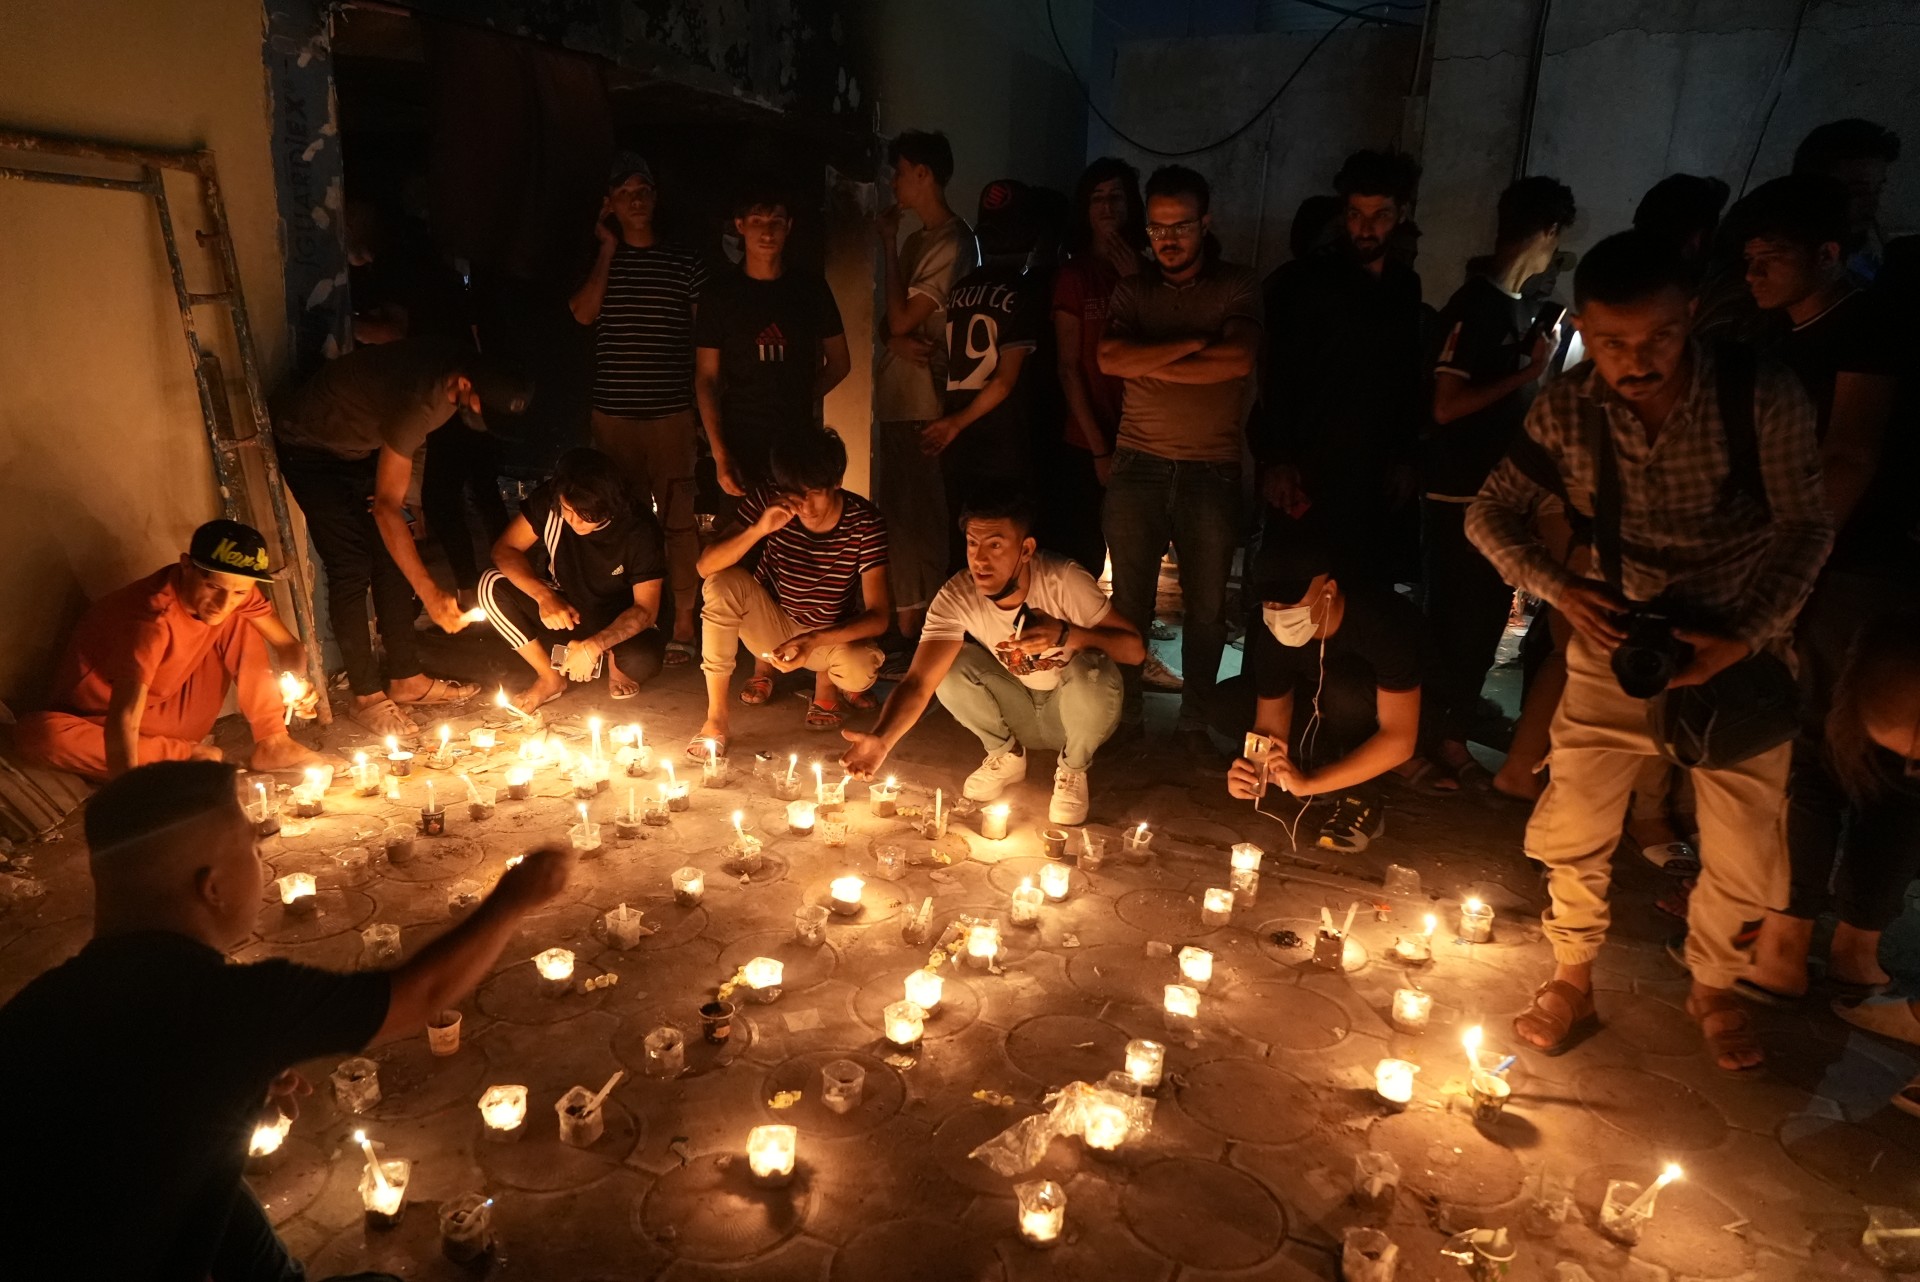 People light candles at the remains of the torched ward in memory of the dead (MEE/Azhar Al-Rubaie)